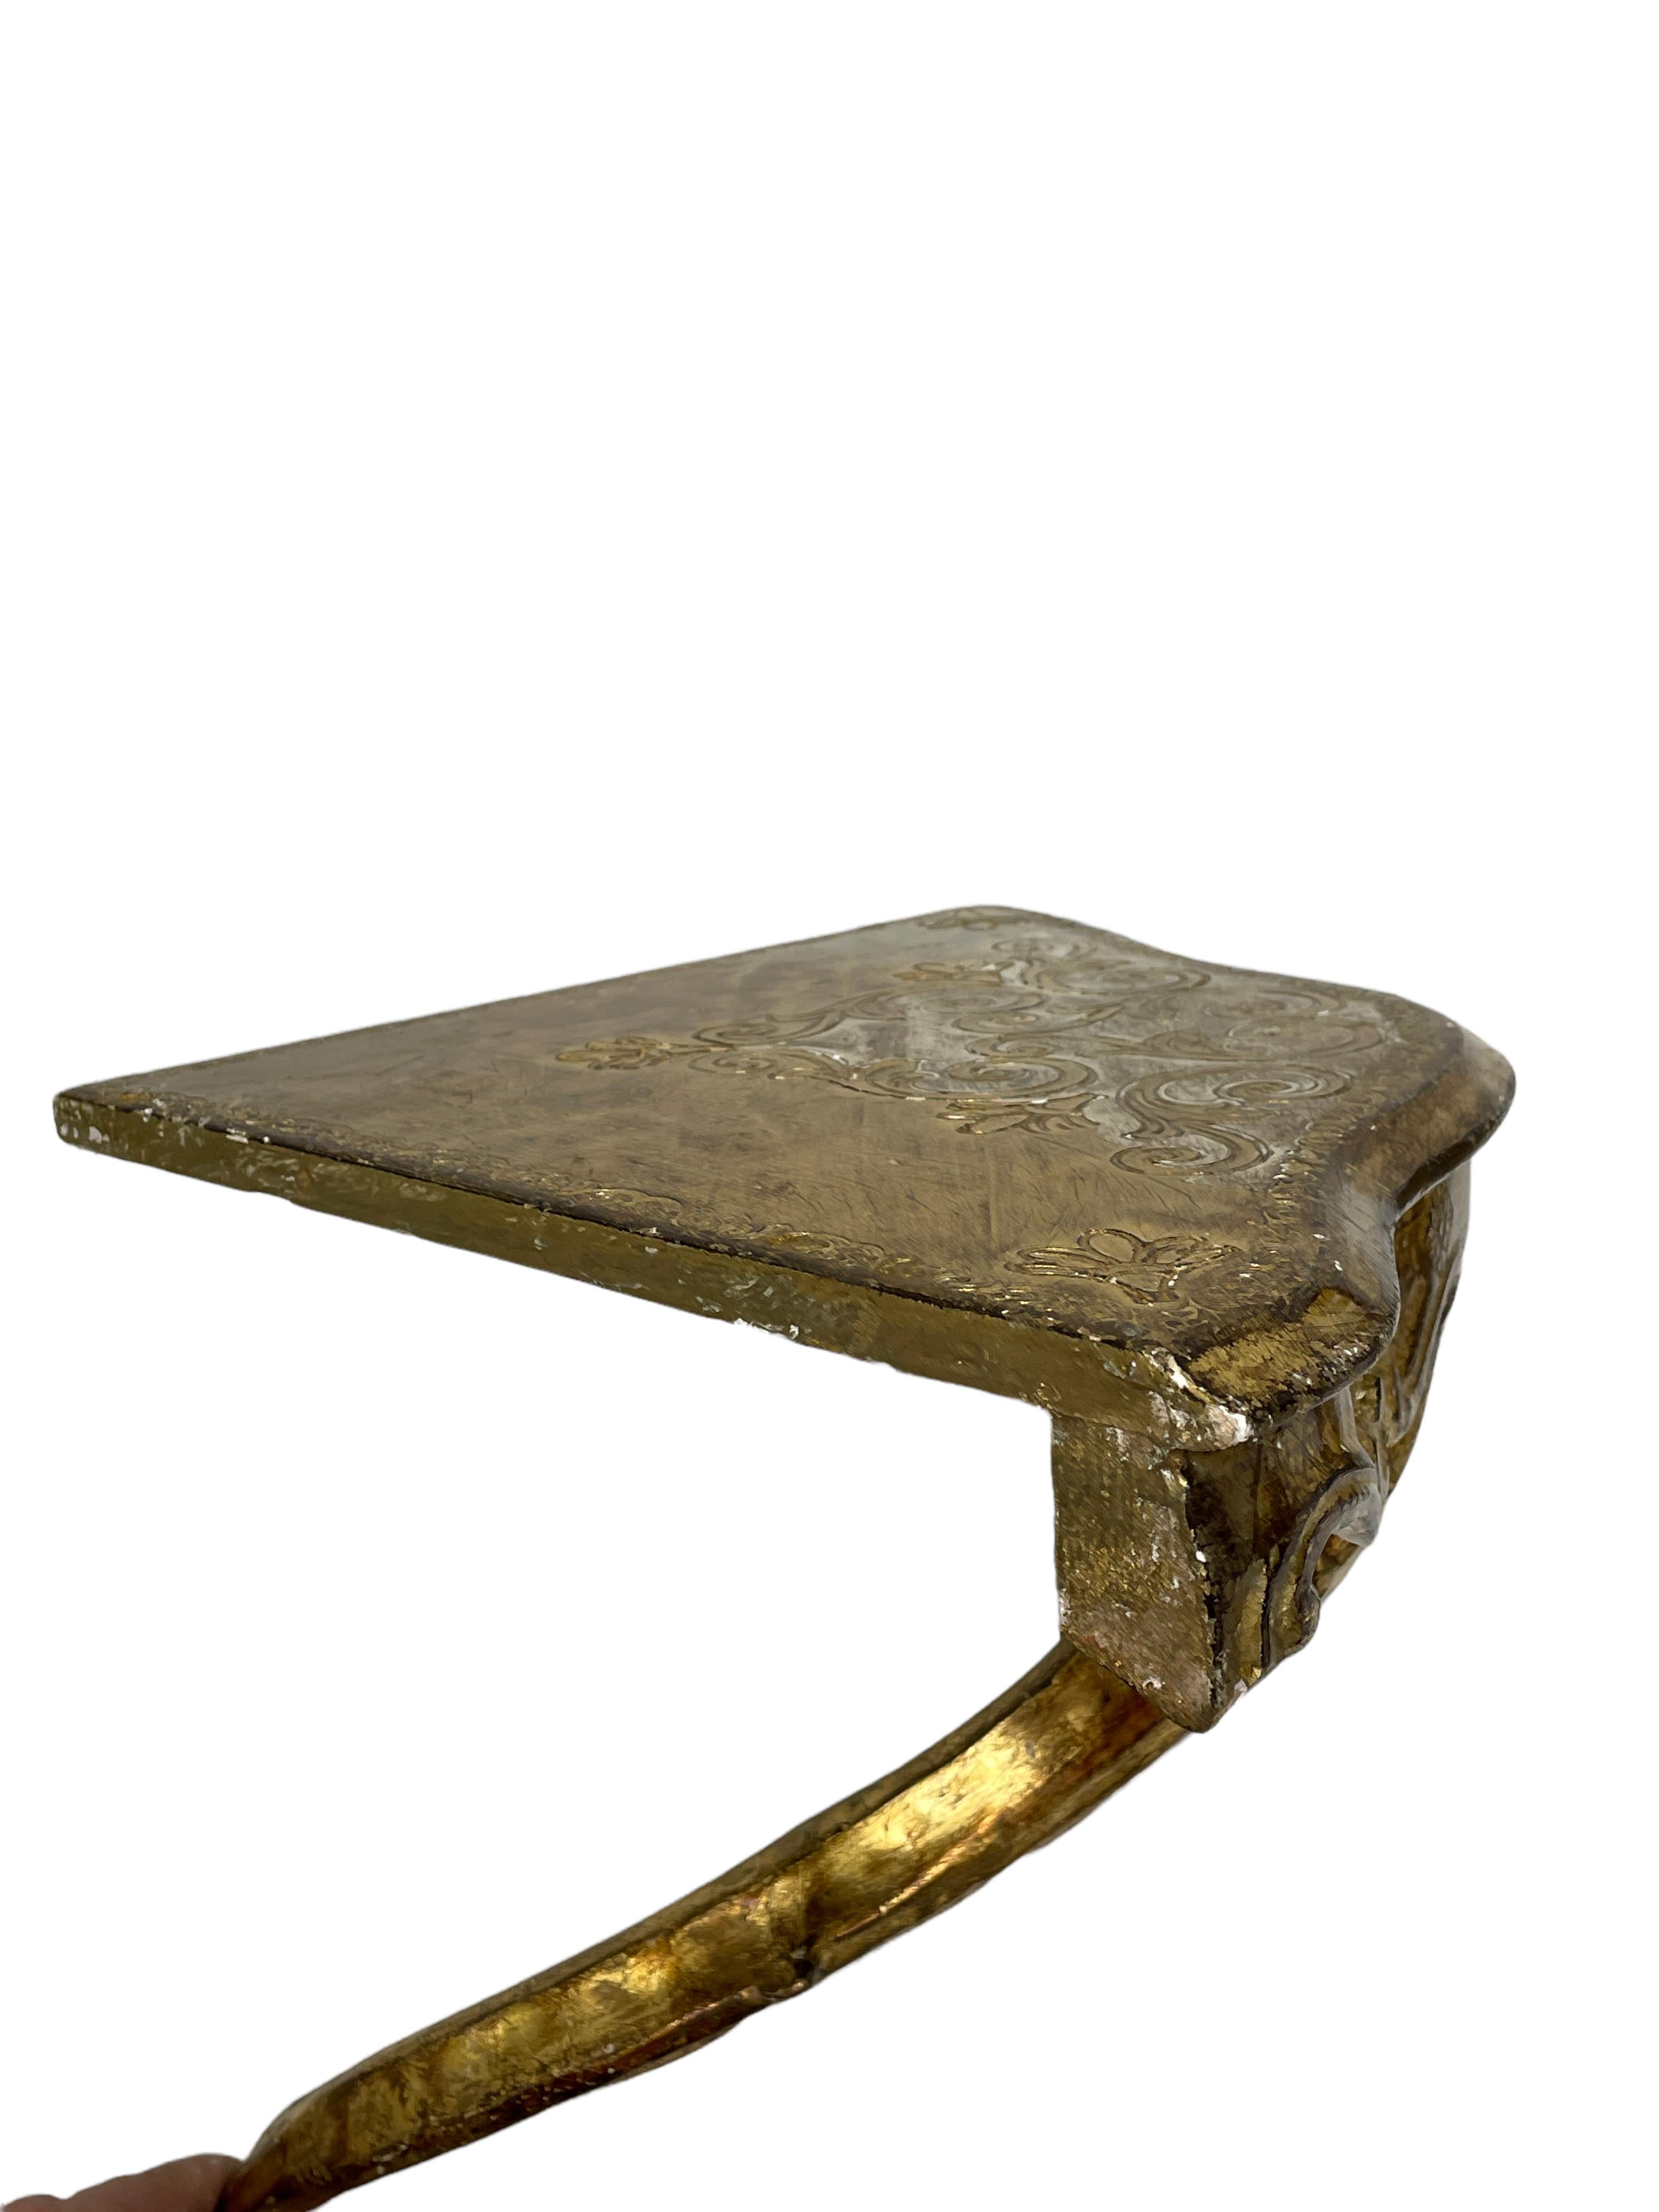 Vintage Florence Wall Corner Shelf Console, Gilded Carved Wood, Florentine Style For Sale 2